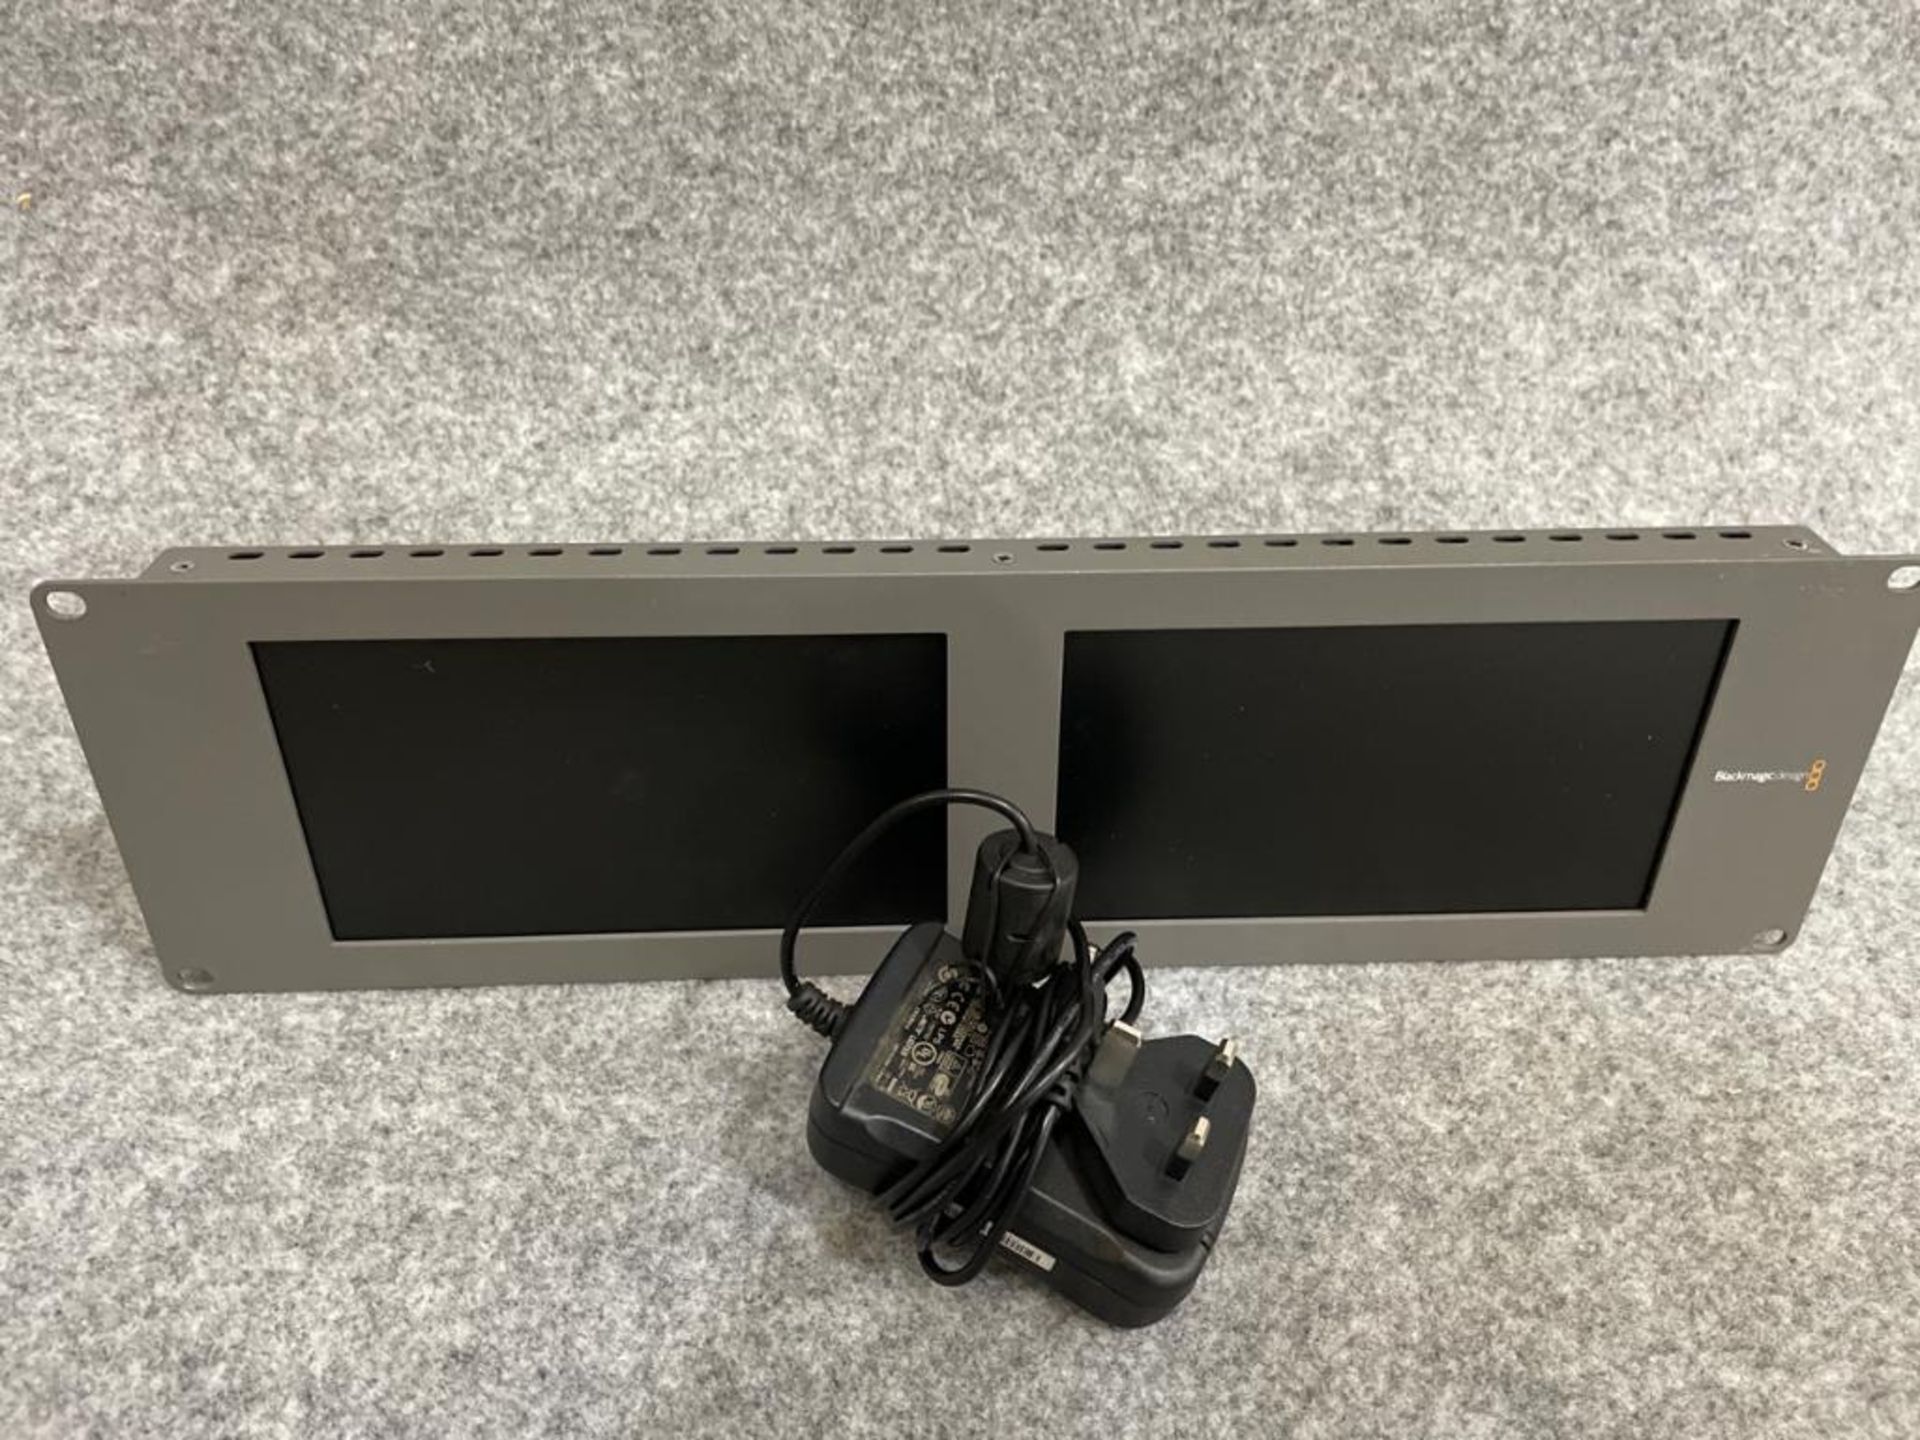 BlackMagic Dual HD Monitor with power supply SN: 1391737 - Image 3 of 3